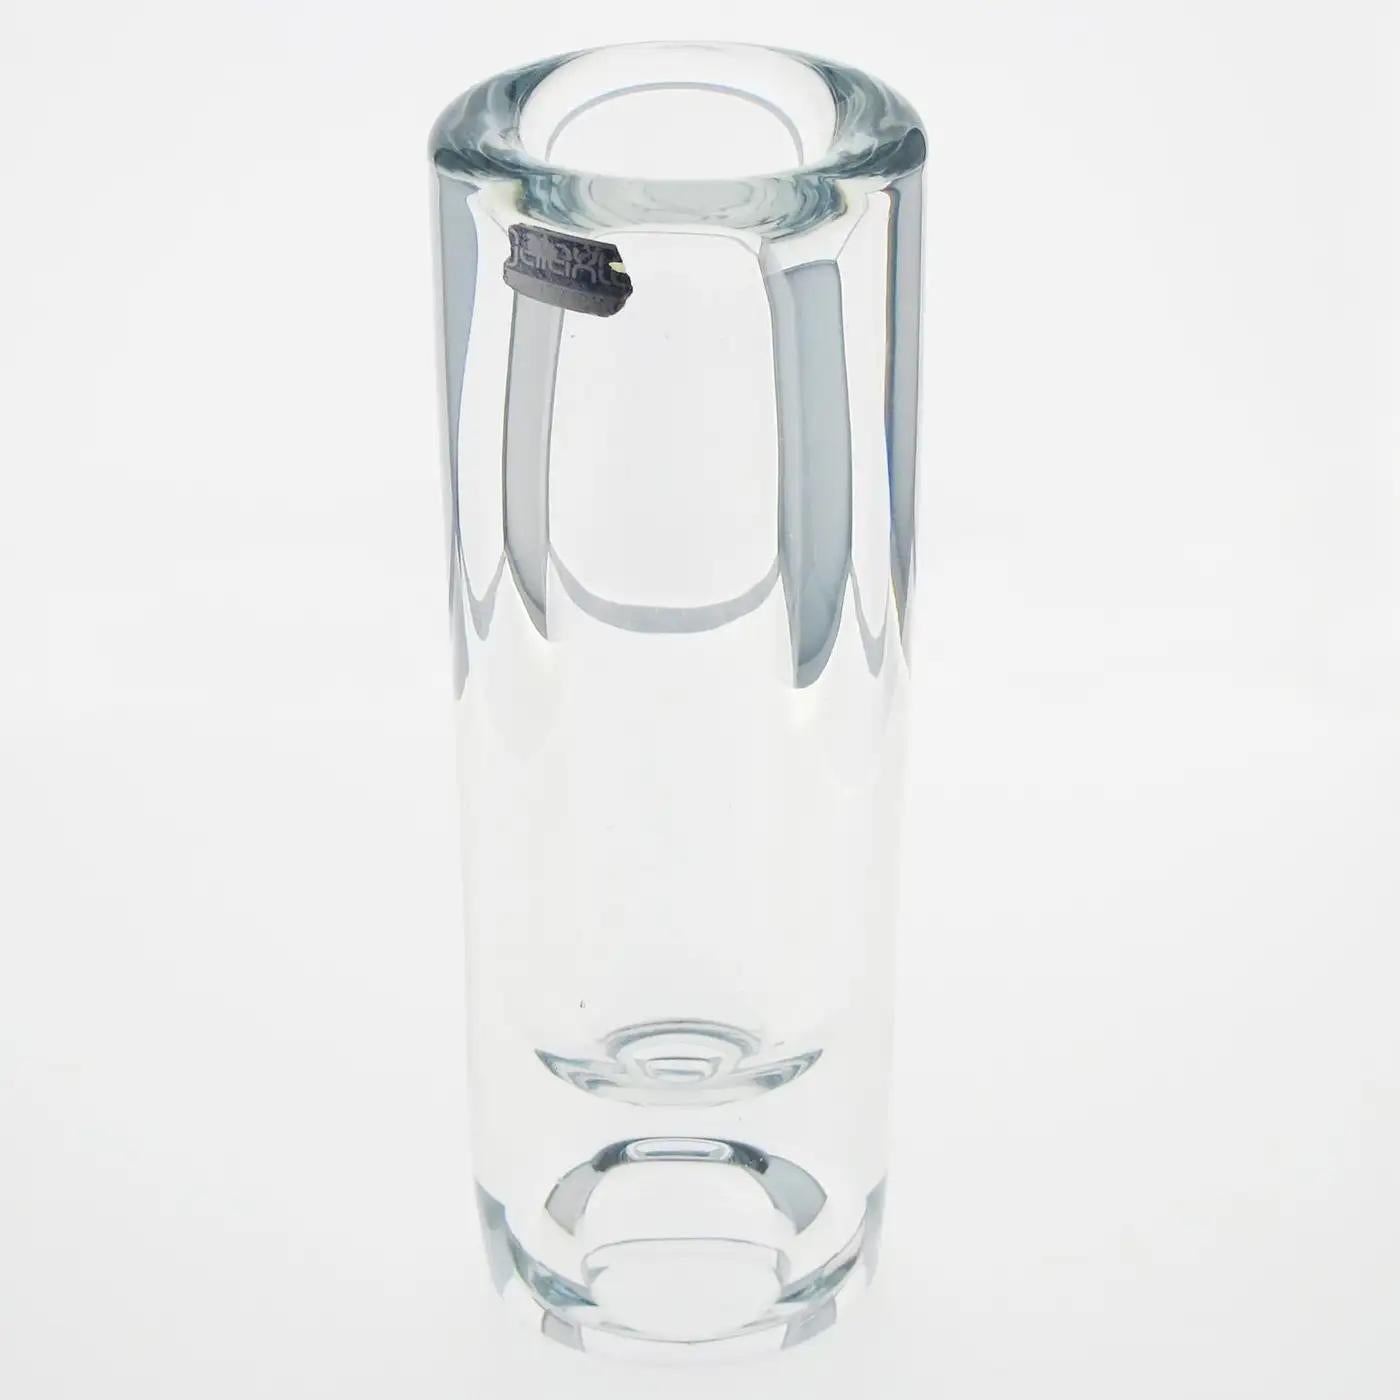 French Daum by De Belroy Tall Crystal Tumbler Vase, Galaxie Collection, 1970s For Sale